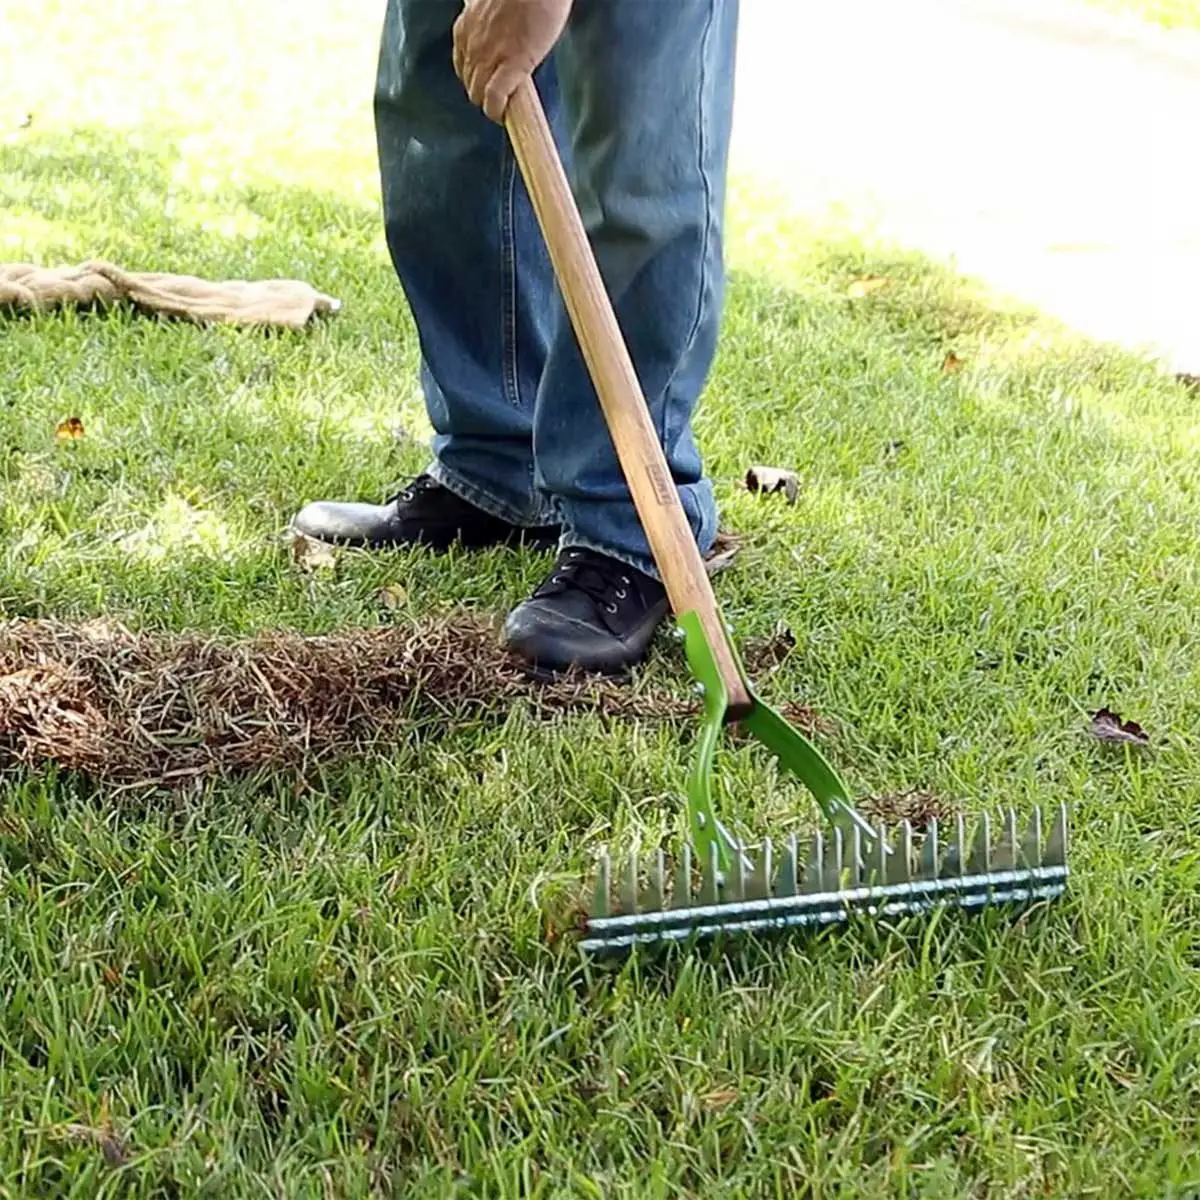 When, Why and How Often to Dethatch Lawn